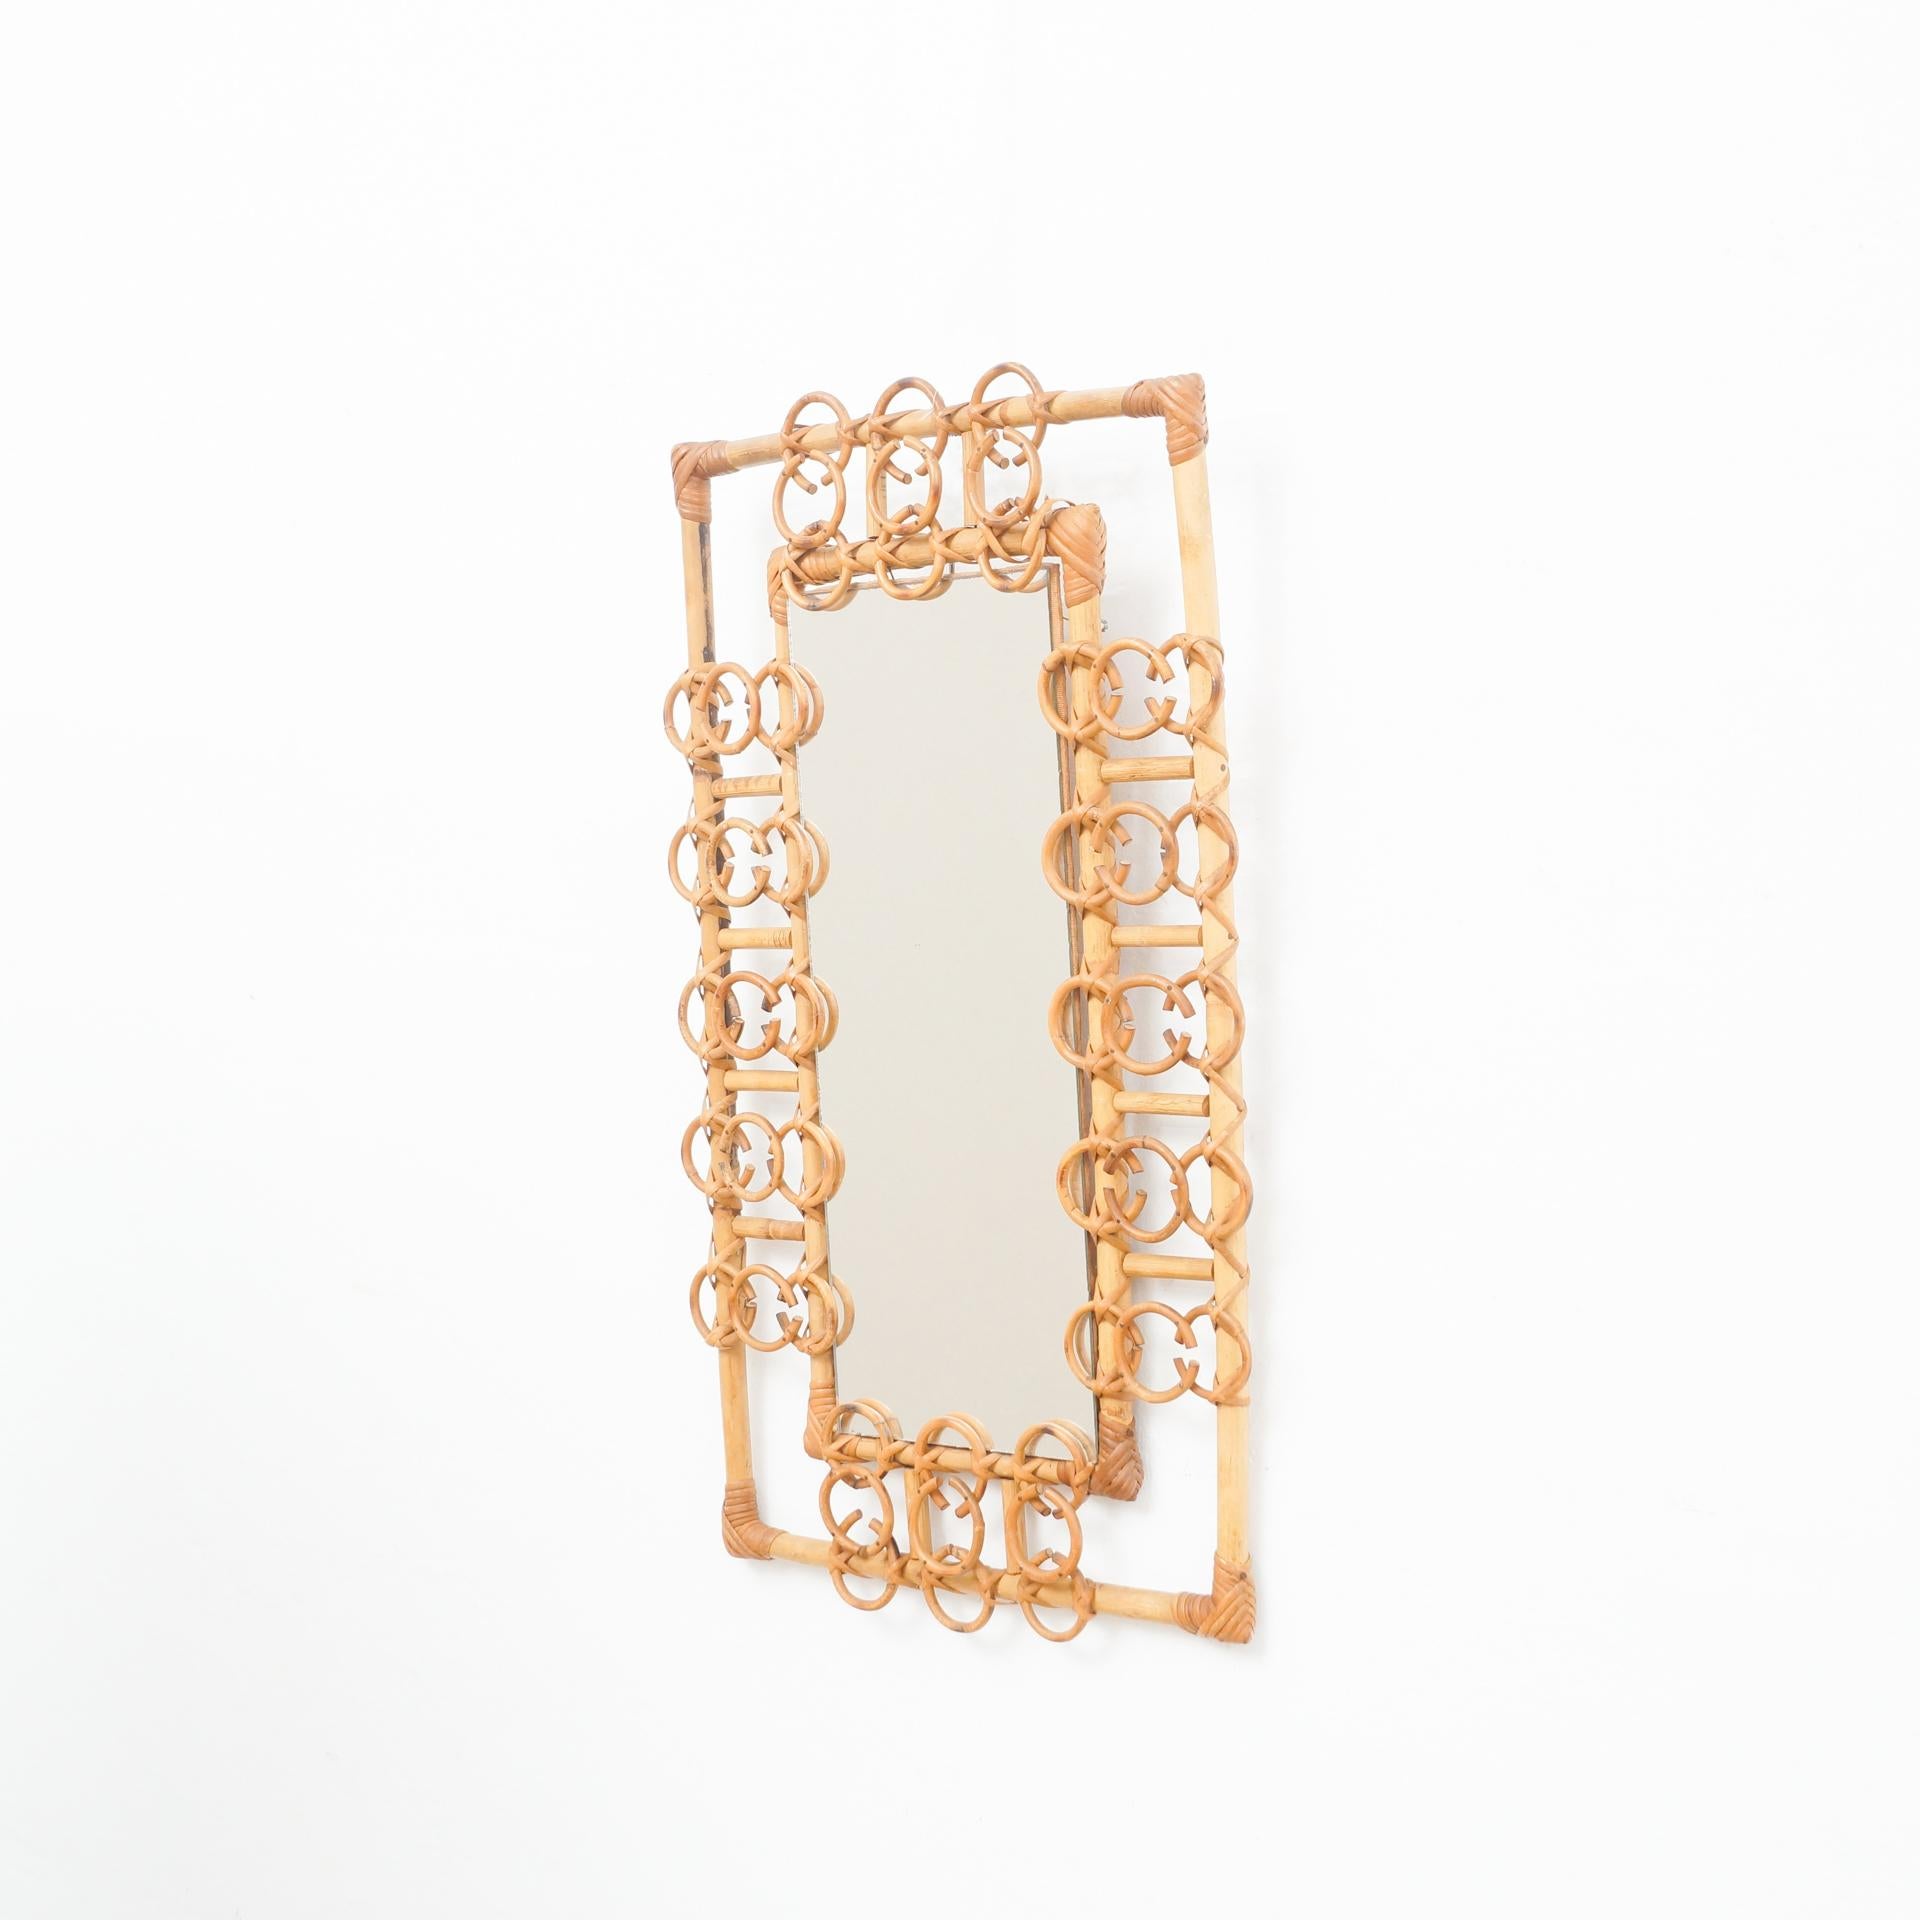 Mid-Century Modern mirror bamboo and rattan handcrafted, circa 1960
Traditionally manufactured in France.
By unknown designer.

In original condition with minor wear consistent of age and use, preserving a beautiful patina.

  